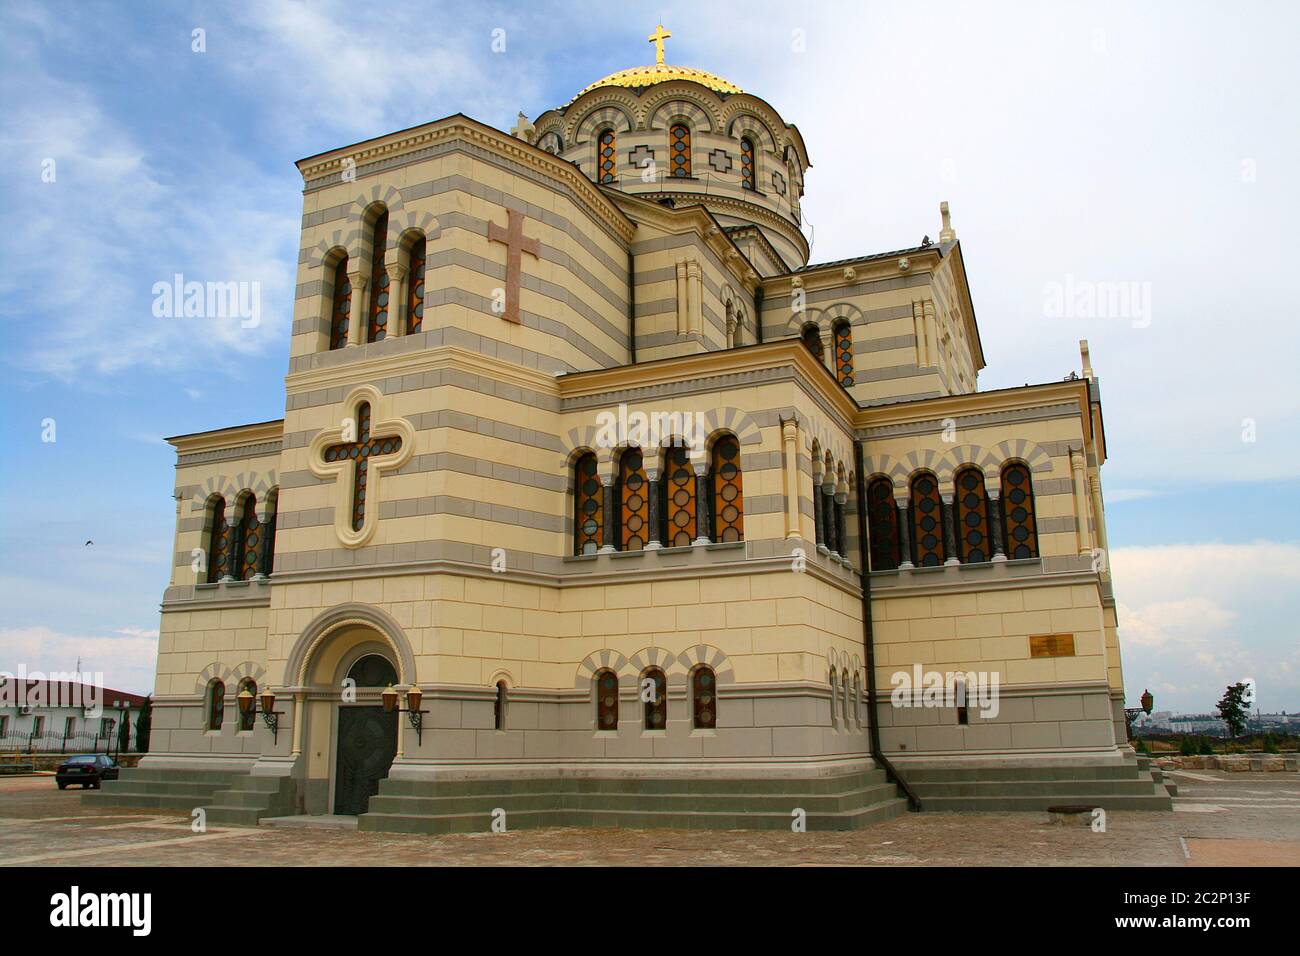 St. Vladimir's Cathedral, Chersonese.  It is one of the city's major landmarks and the mother cathedral of the Ukrainian Orthodox Church - Kiev Patria Stock Photo